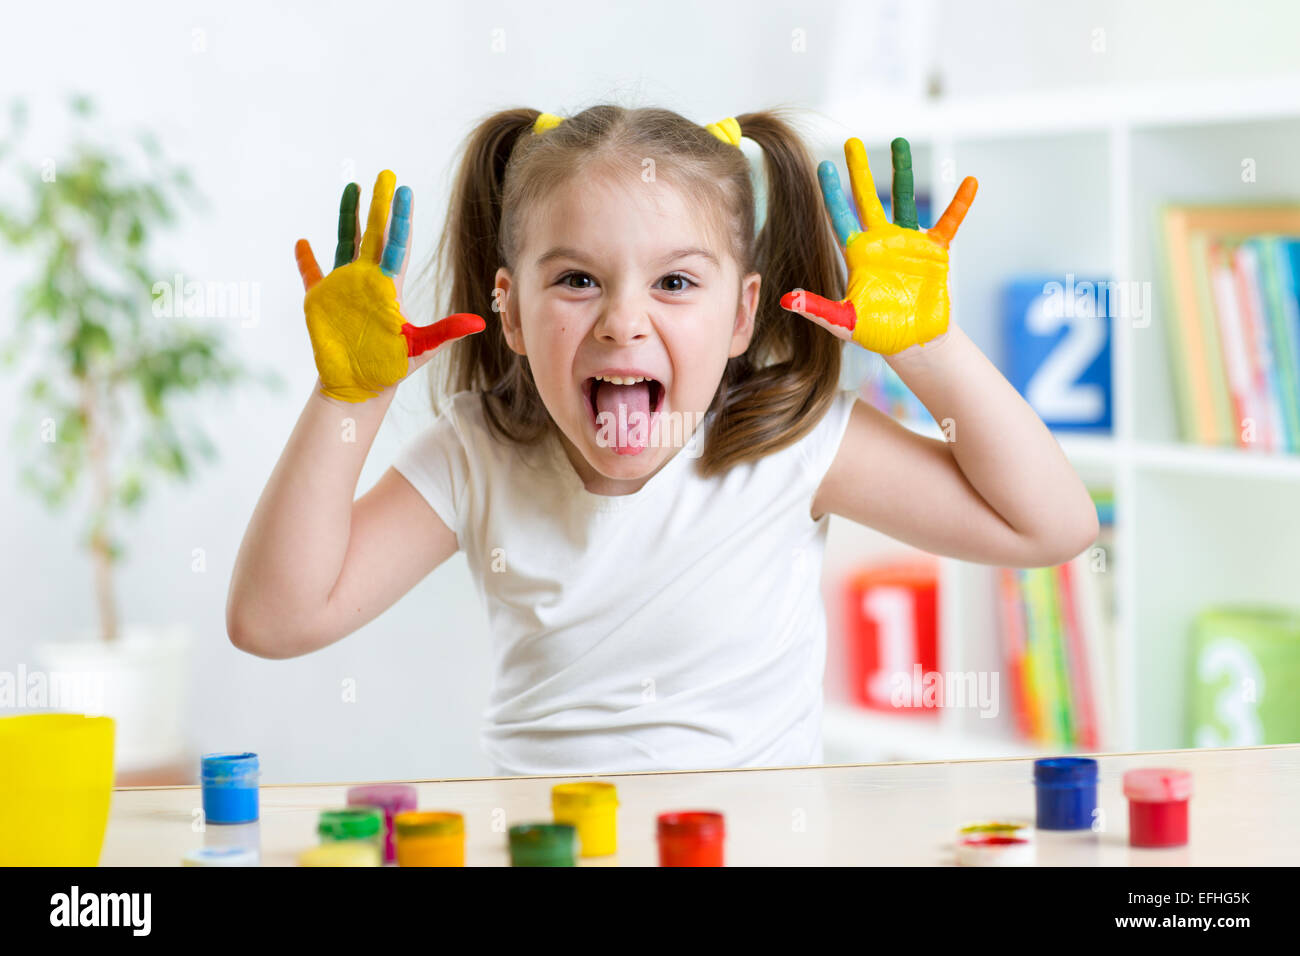 Funny kid with hands painted in colorful paint Stock Photo